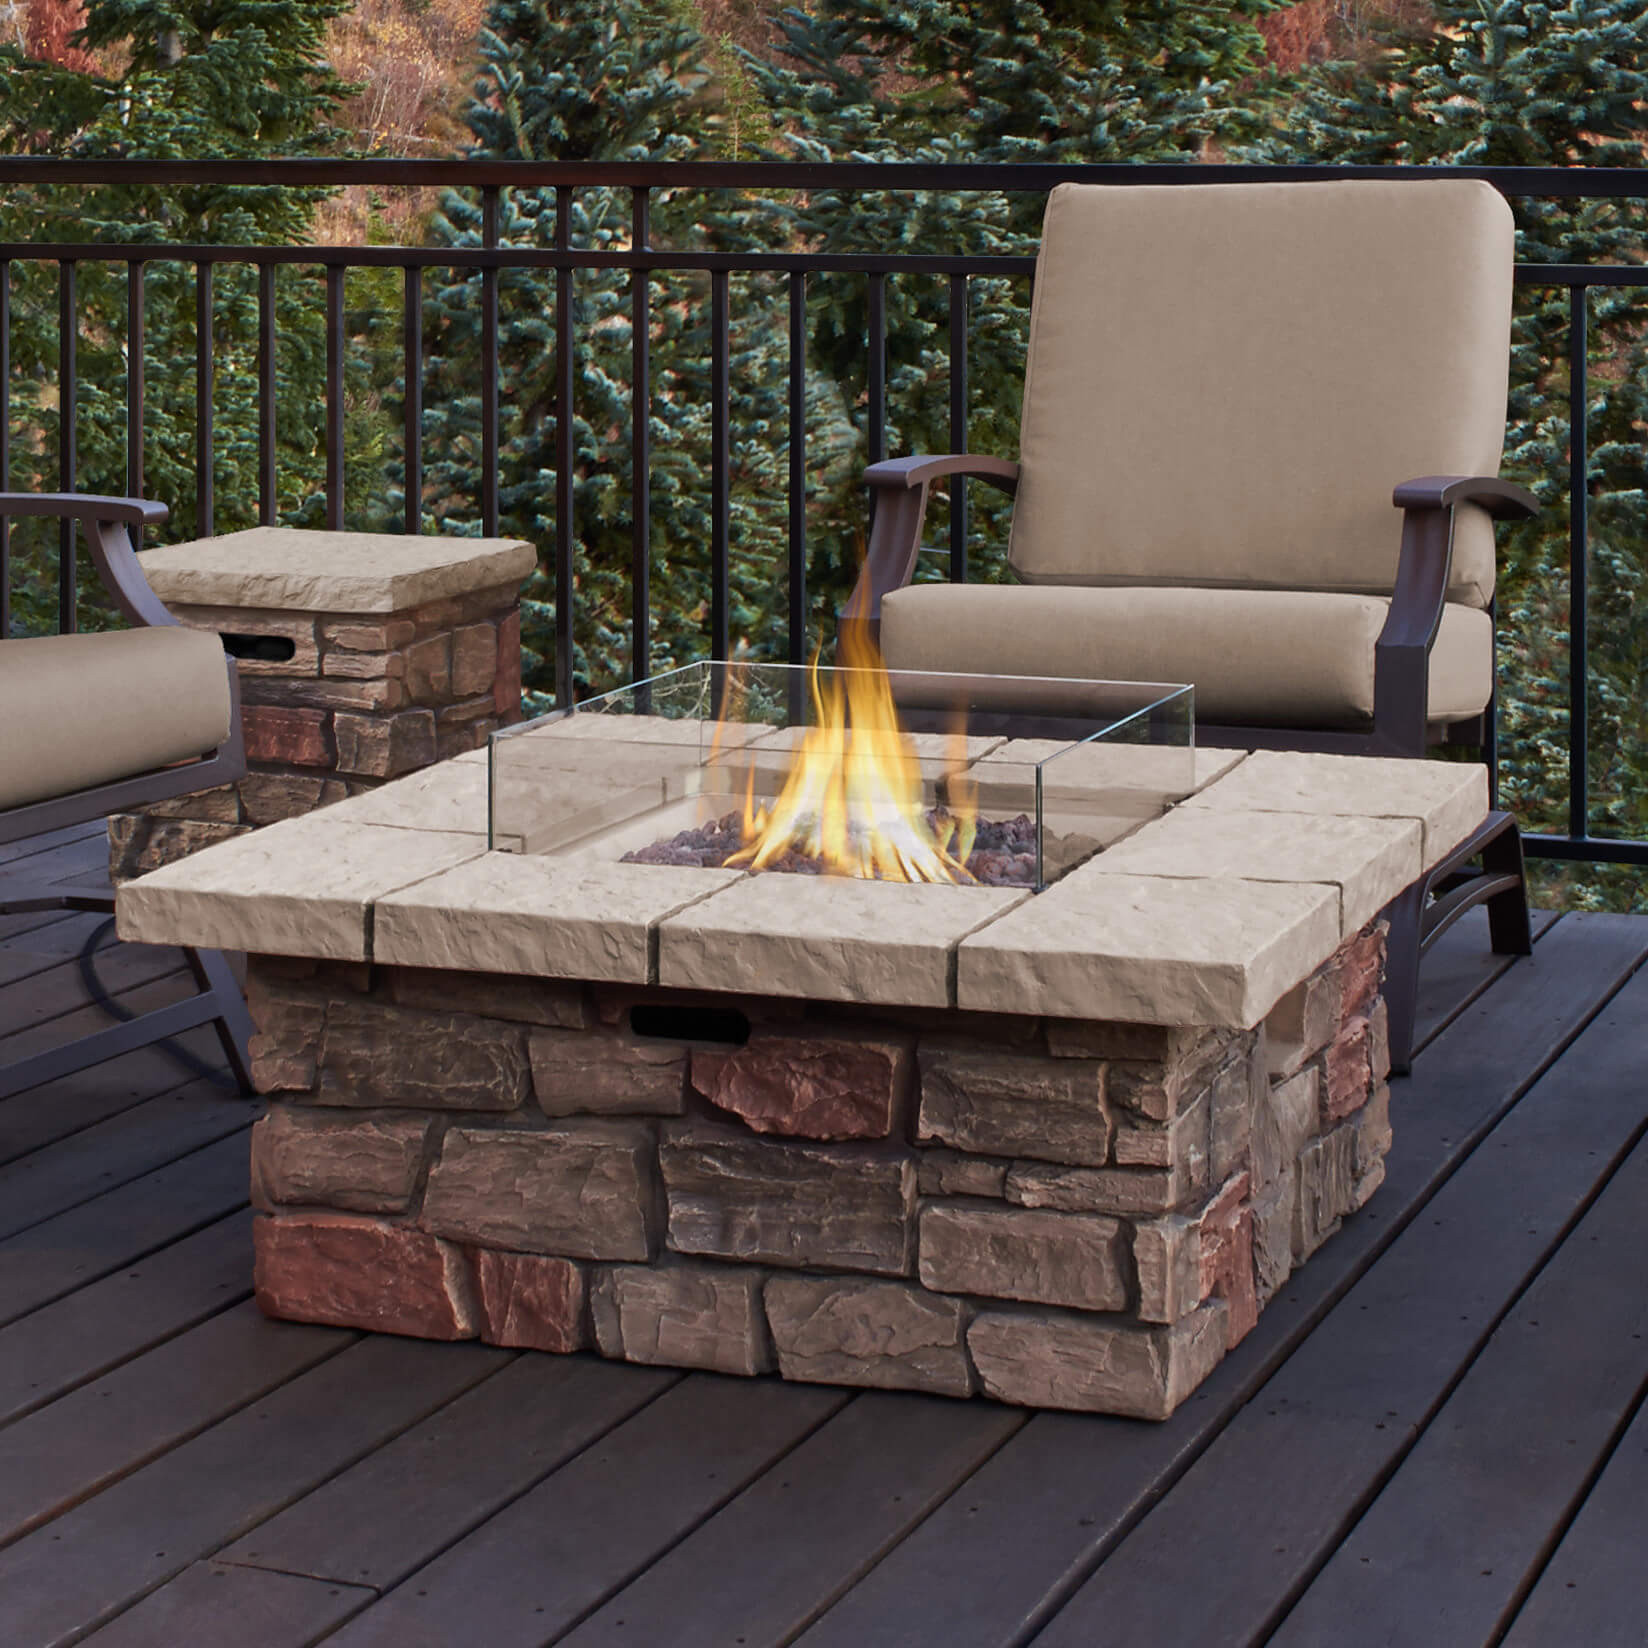 Firepit Patio Table
 Top 15 Types of Propane Patio Fire Pits with Table Buying